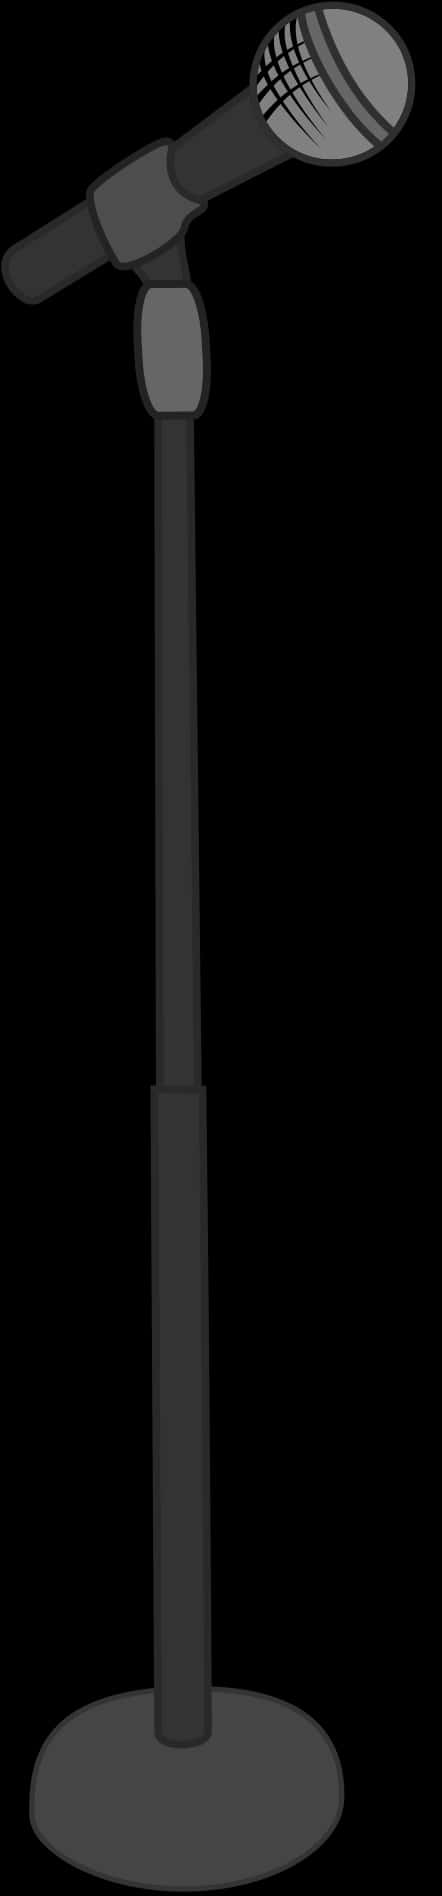 Standing Microphone Graphic PNG